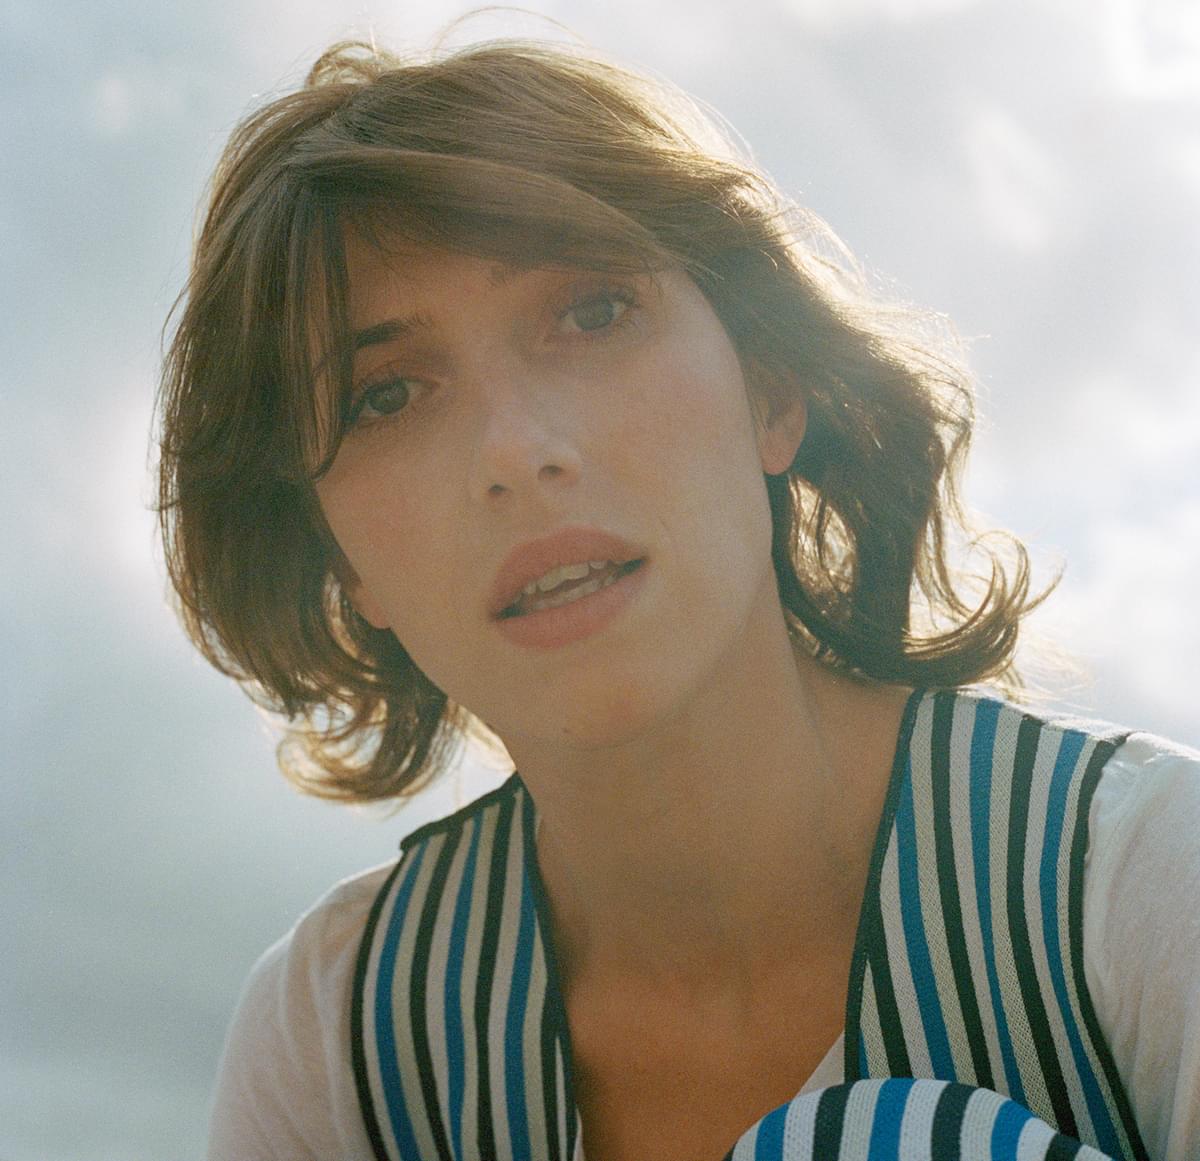 Aldous Harding by Clare Shilland